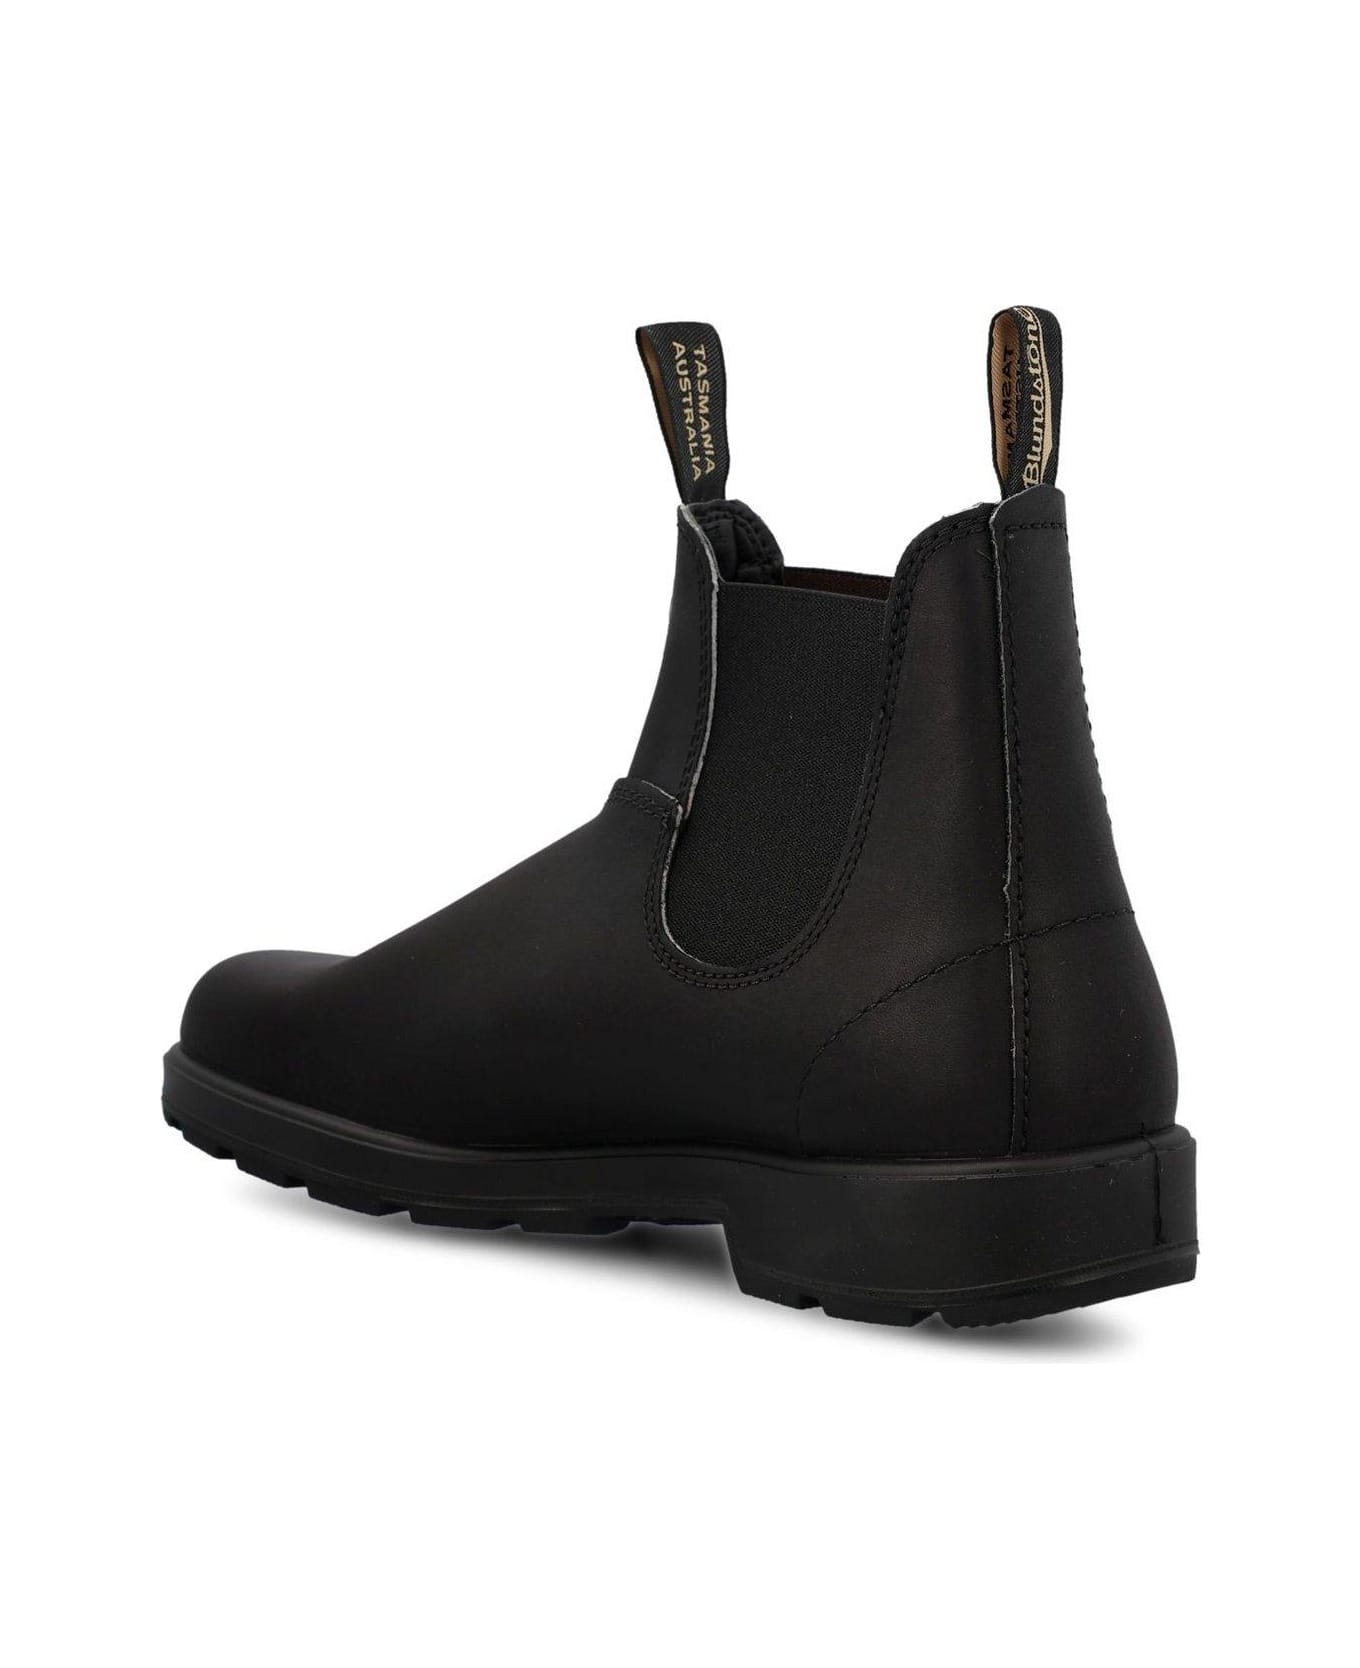 Blundstone Round-toe Ankle Boots - Black